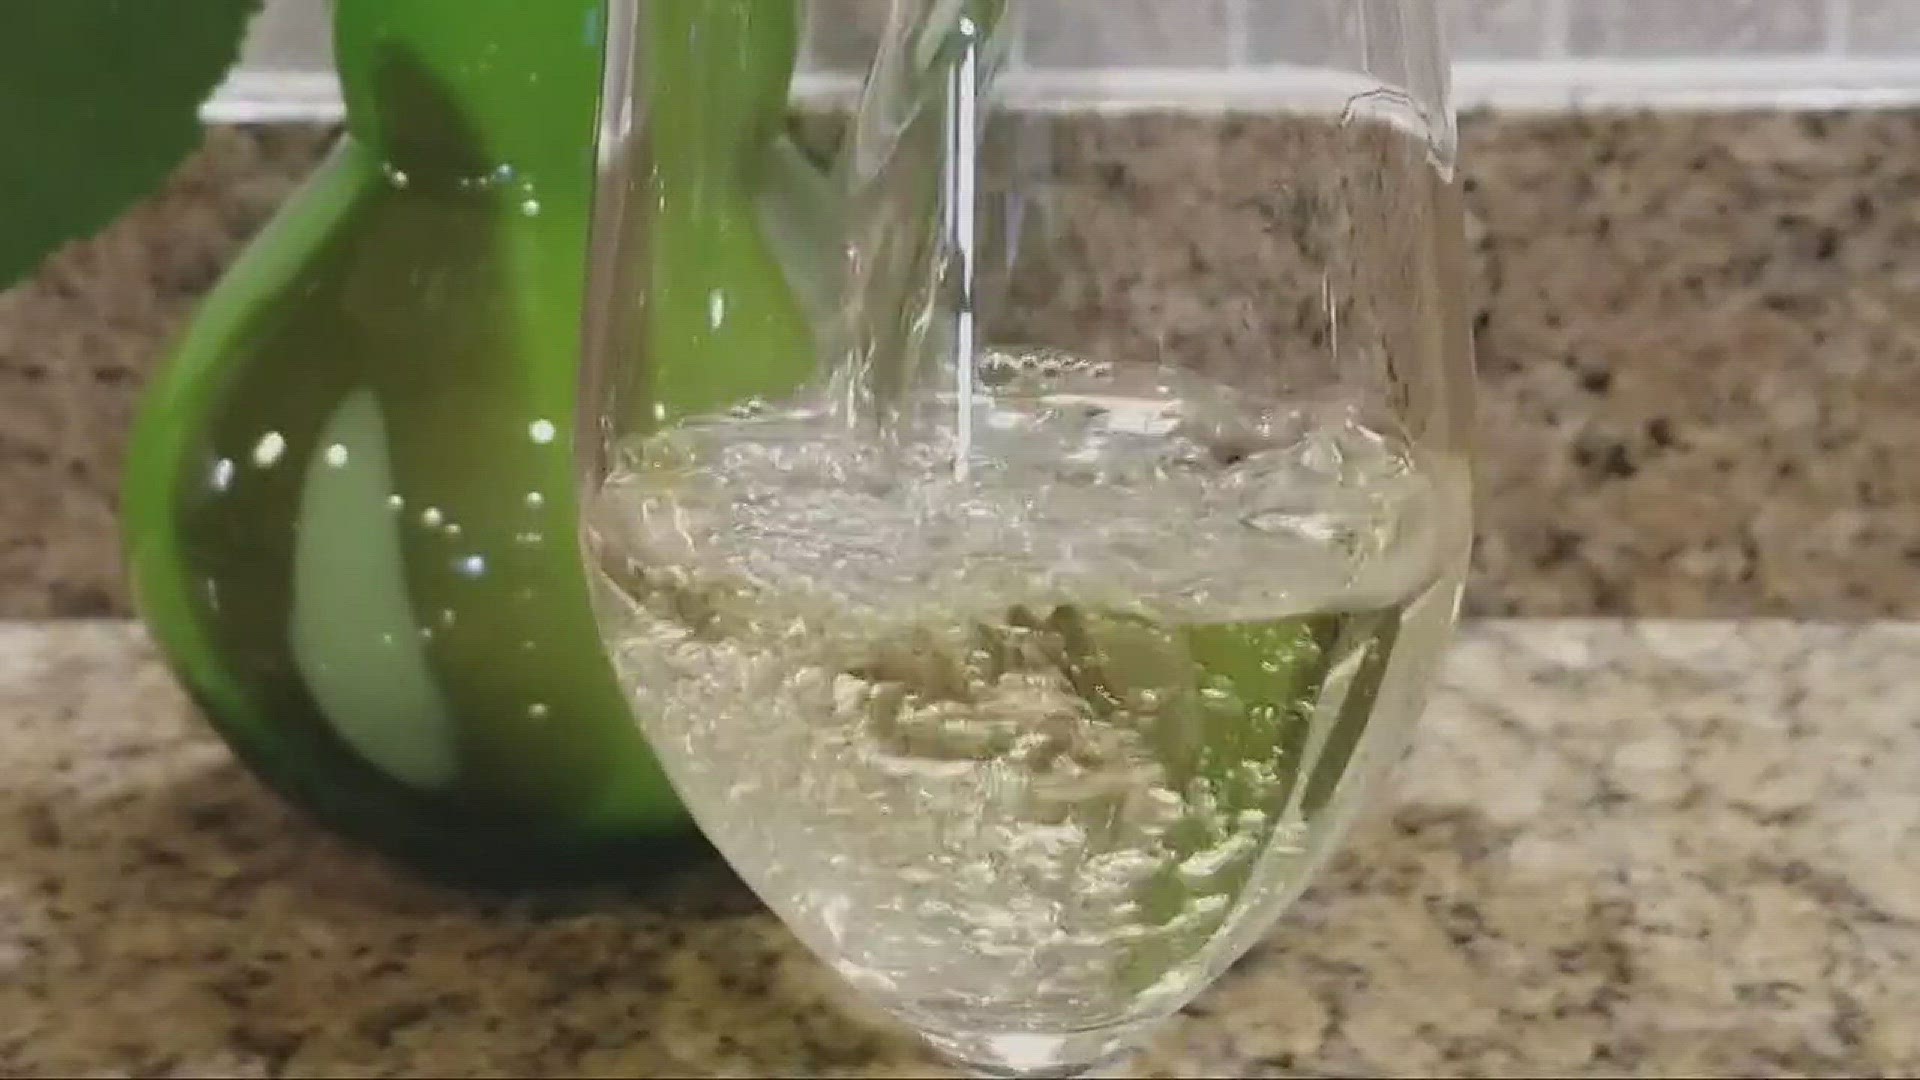 July 20, 2017: There's a fast, easy way to chill wine faster than ever. All it takes is nine minutes. WKYC's Lynna Lai shows us how it works in today's life hack.